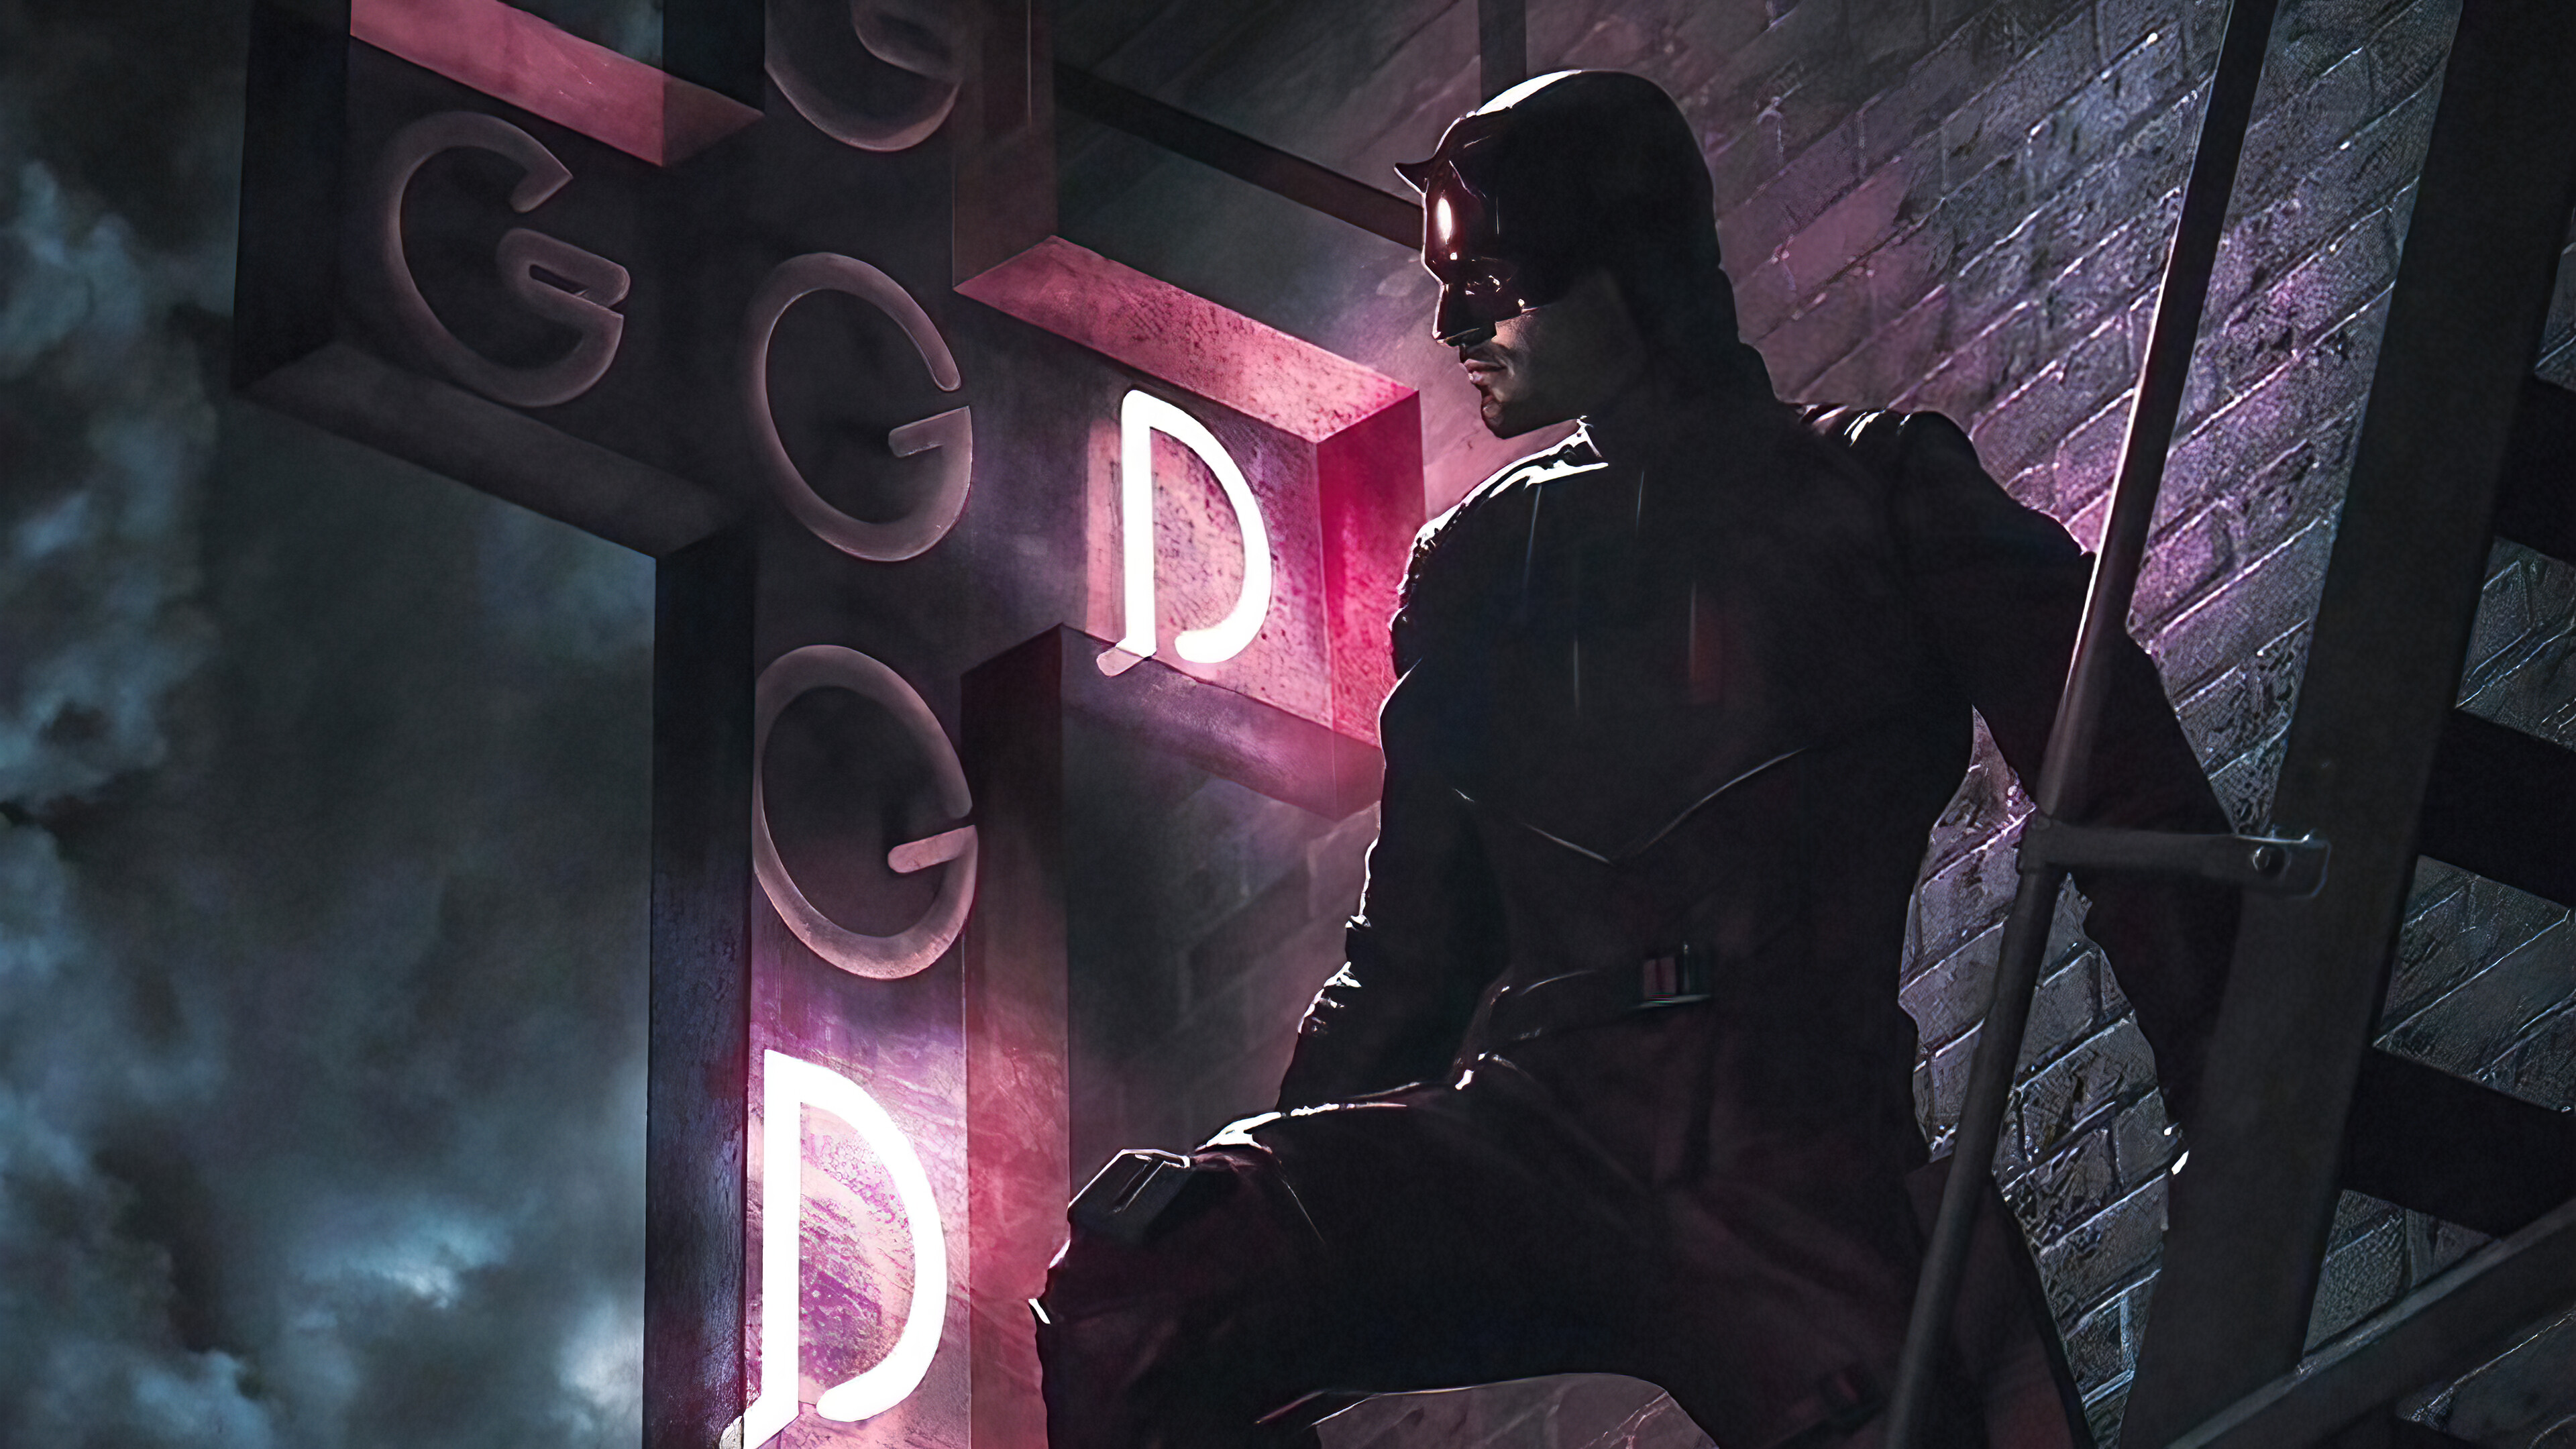 Daredevil (TV Series): Season 4, Television show created for Netflix, based on the Marvel Comics character. 3840x2160 4K Background.